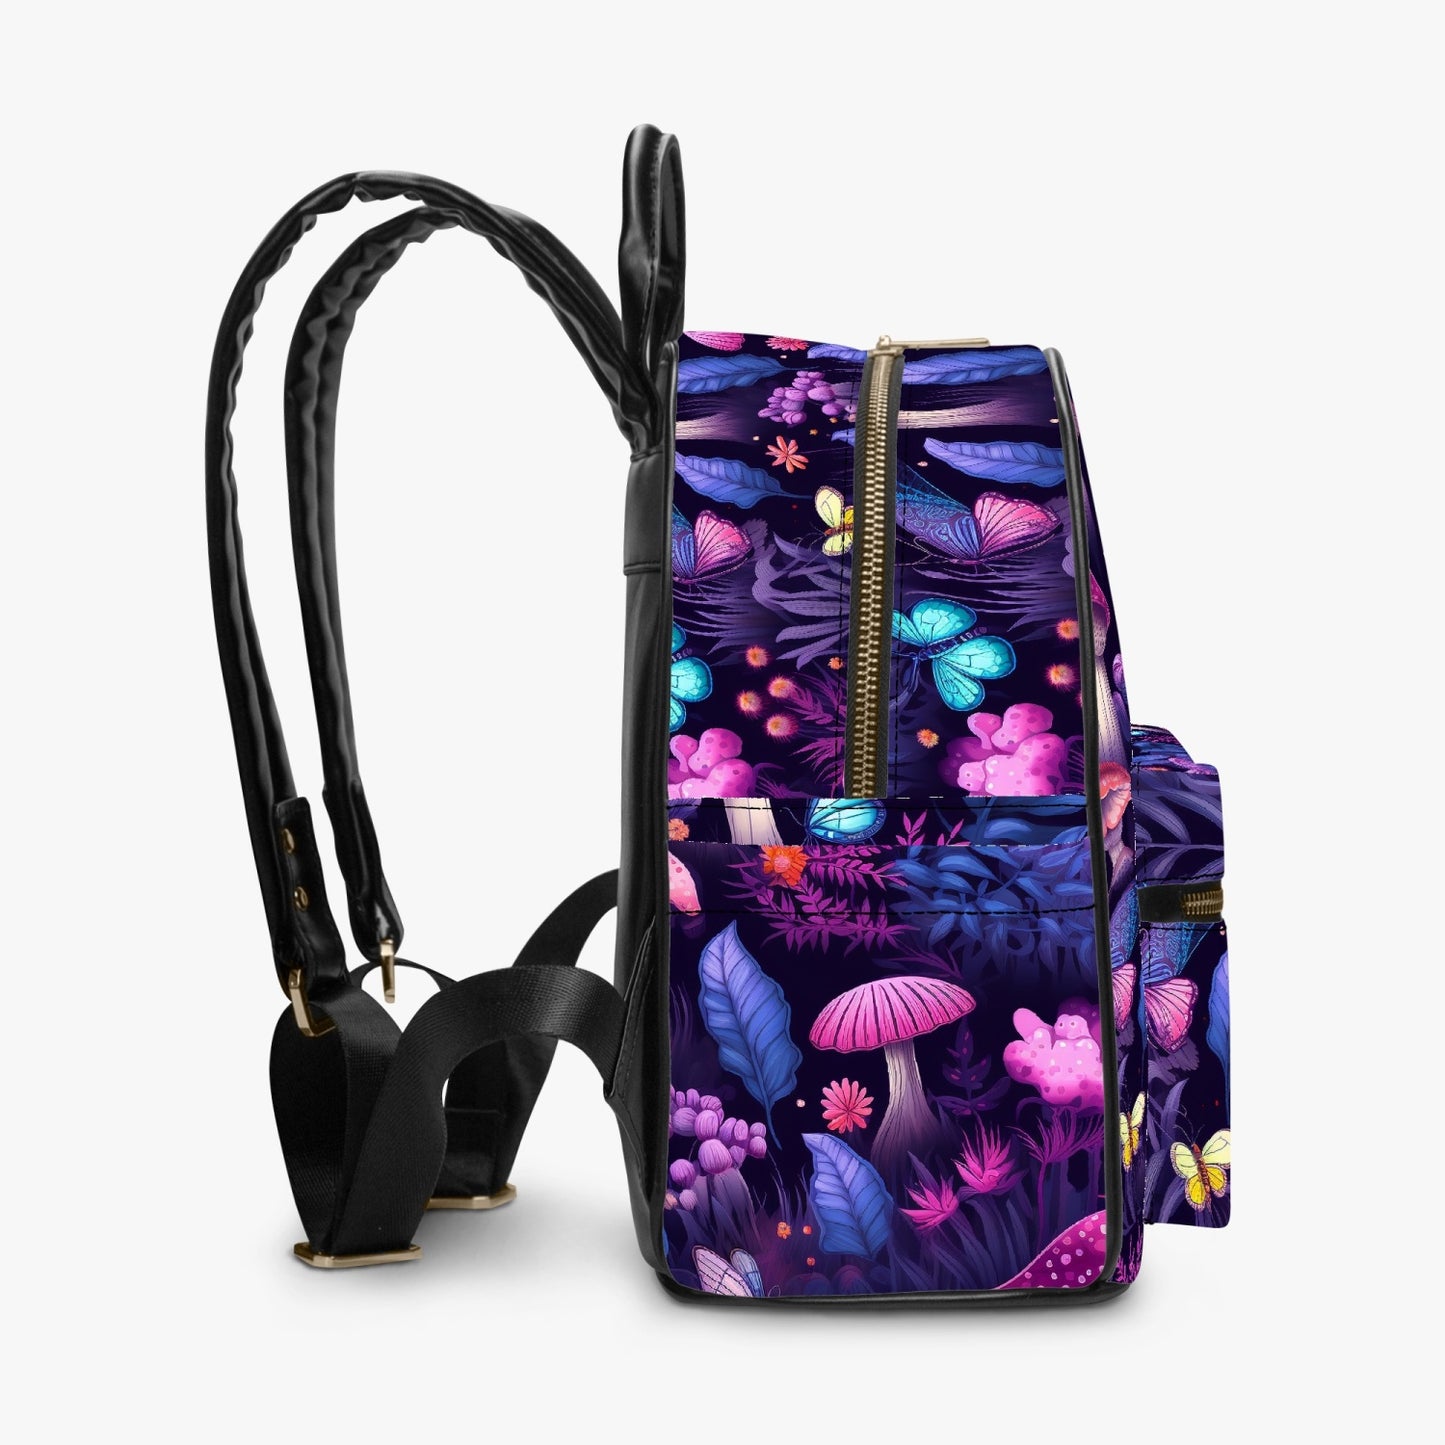 Mushroom Core Purple and Pink Forest Small Back Pack (JPBPPP2)